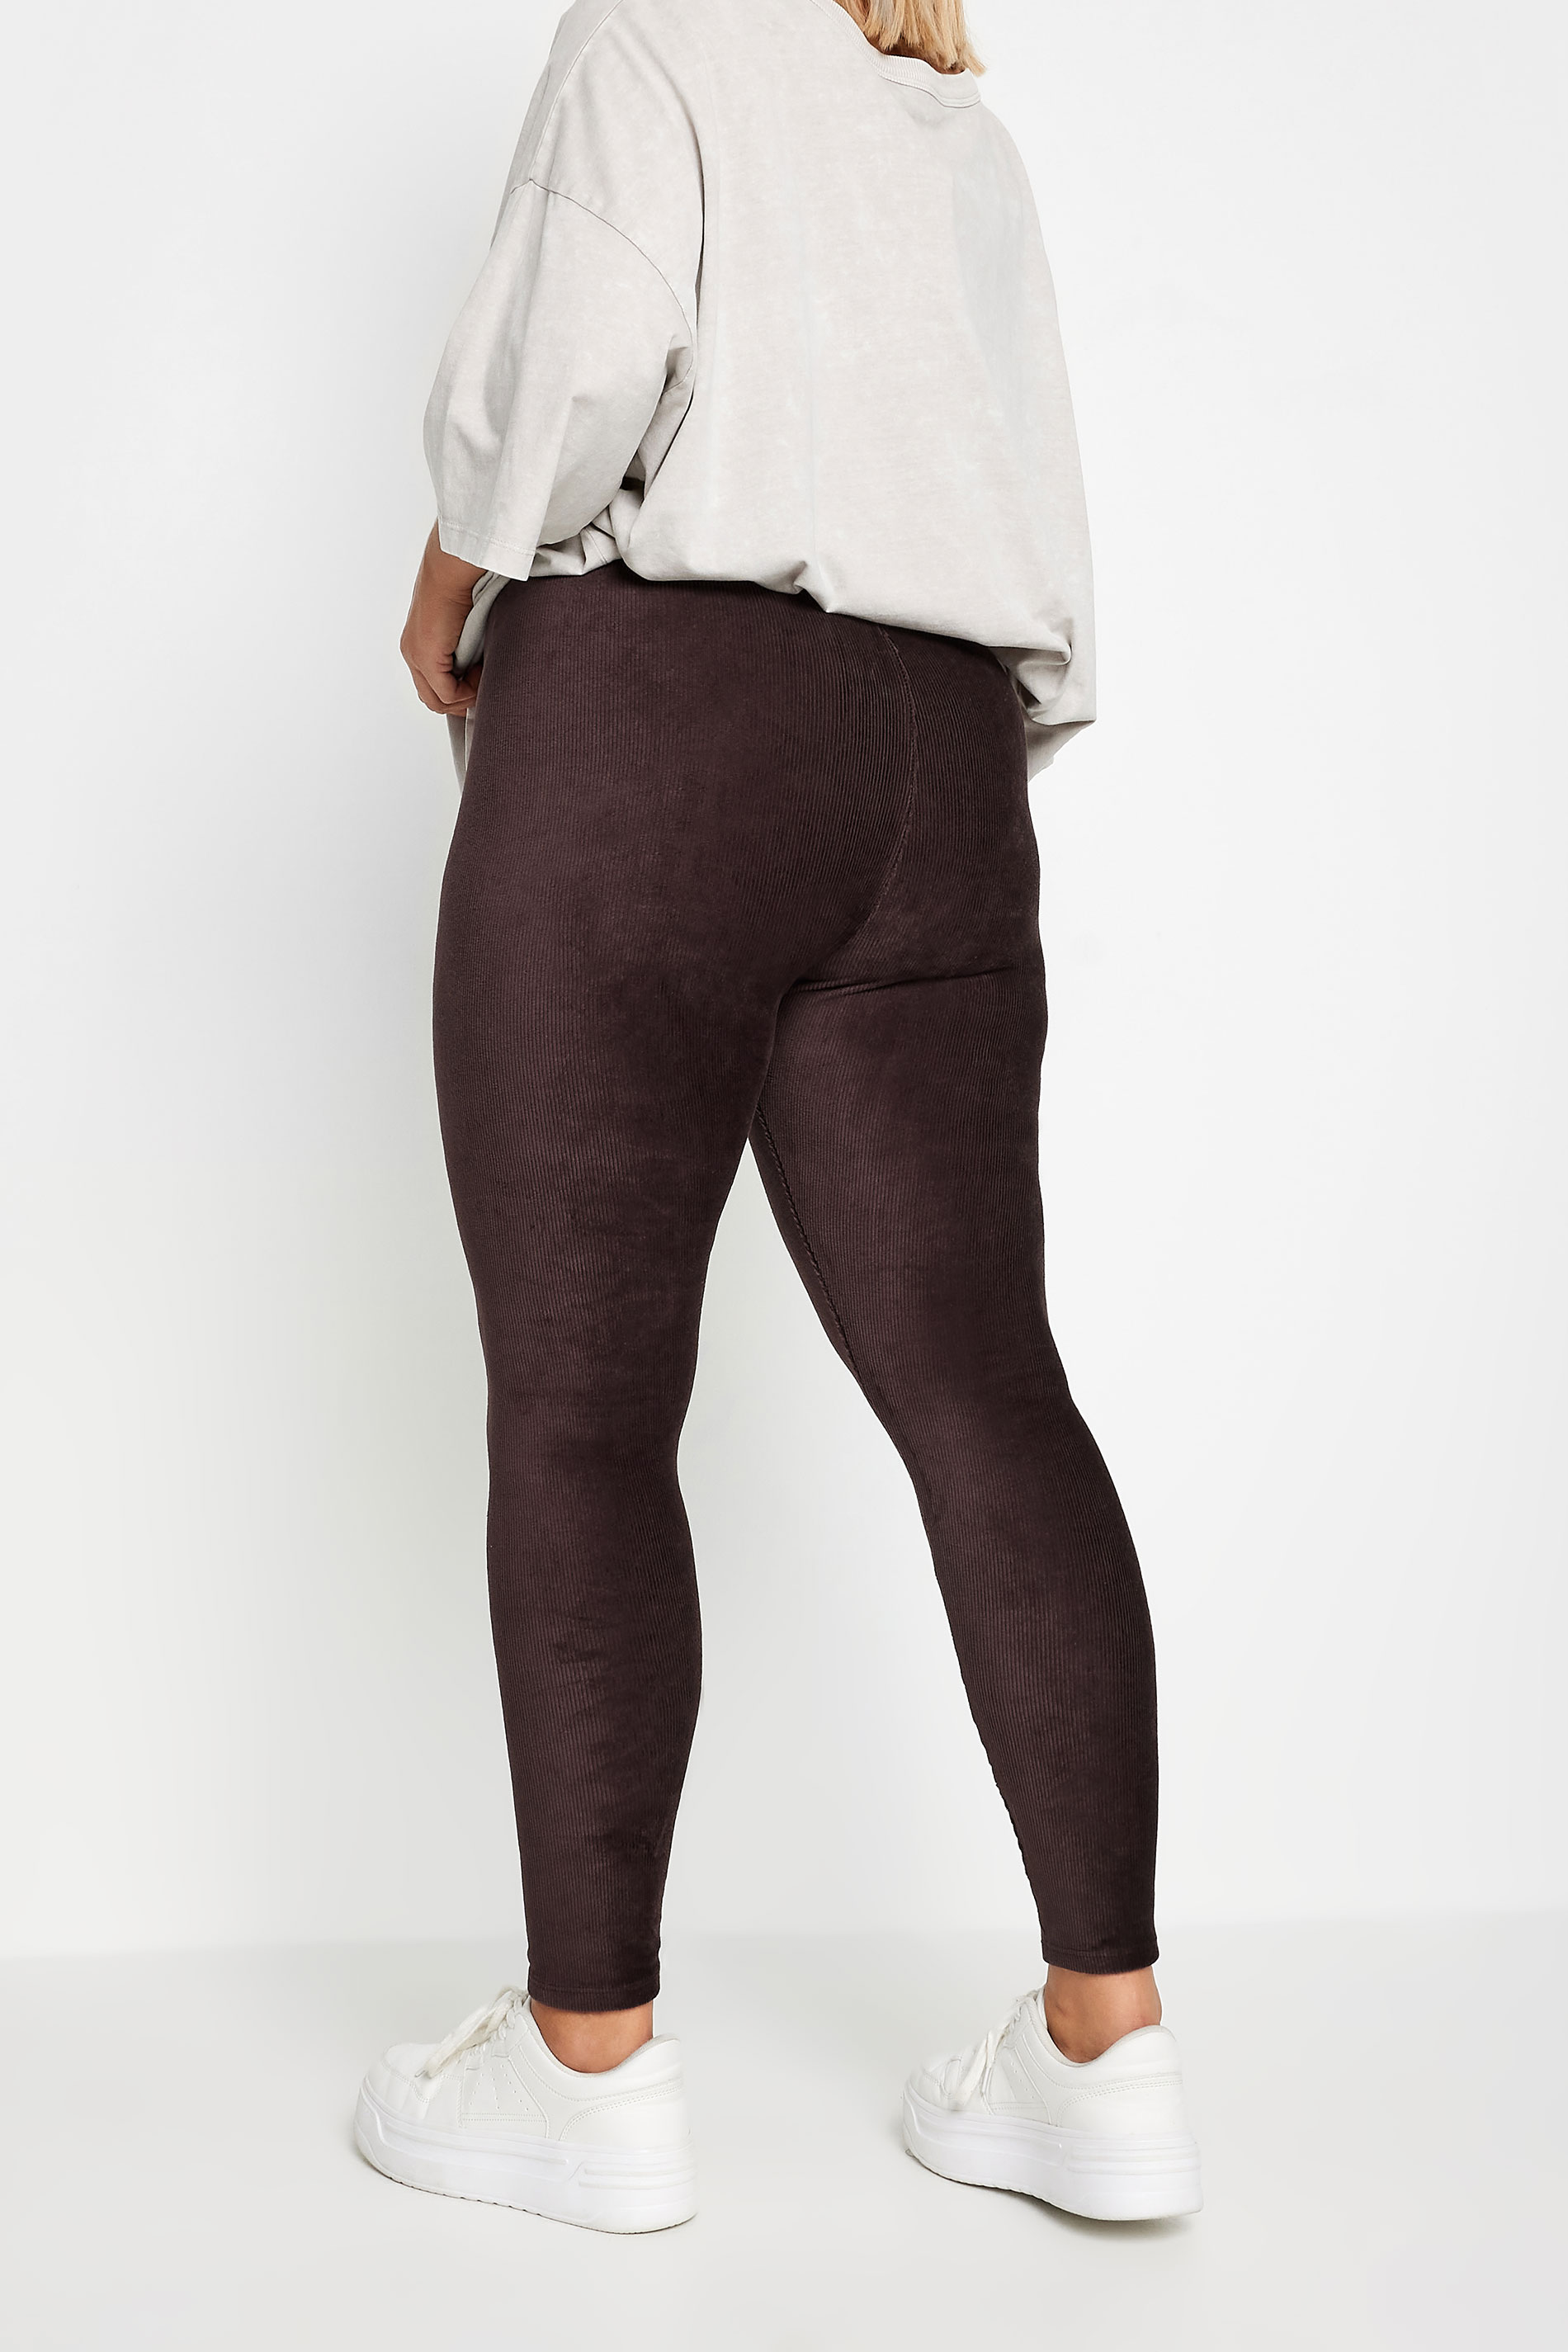 Plus Size Chocolate Brown Cord Leggings | Yours Clothing 3